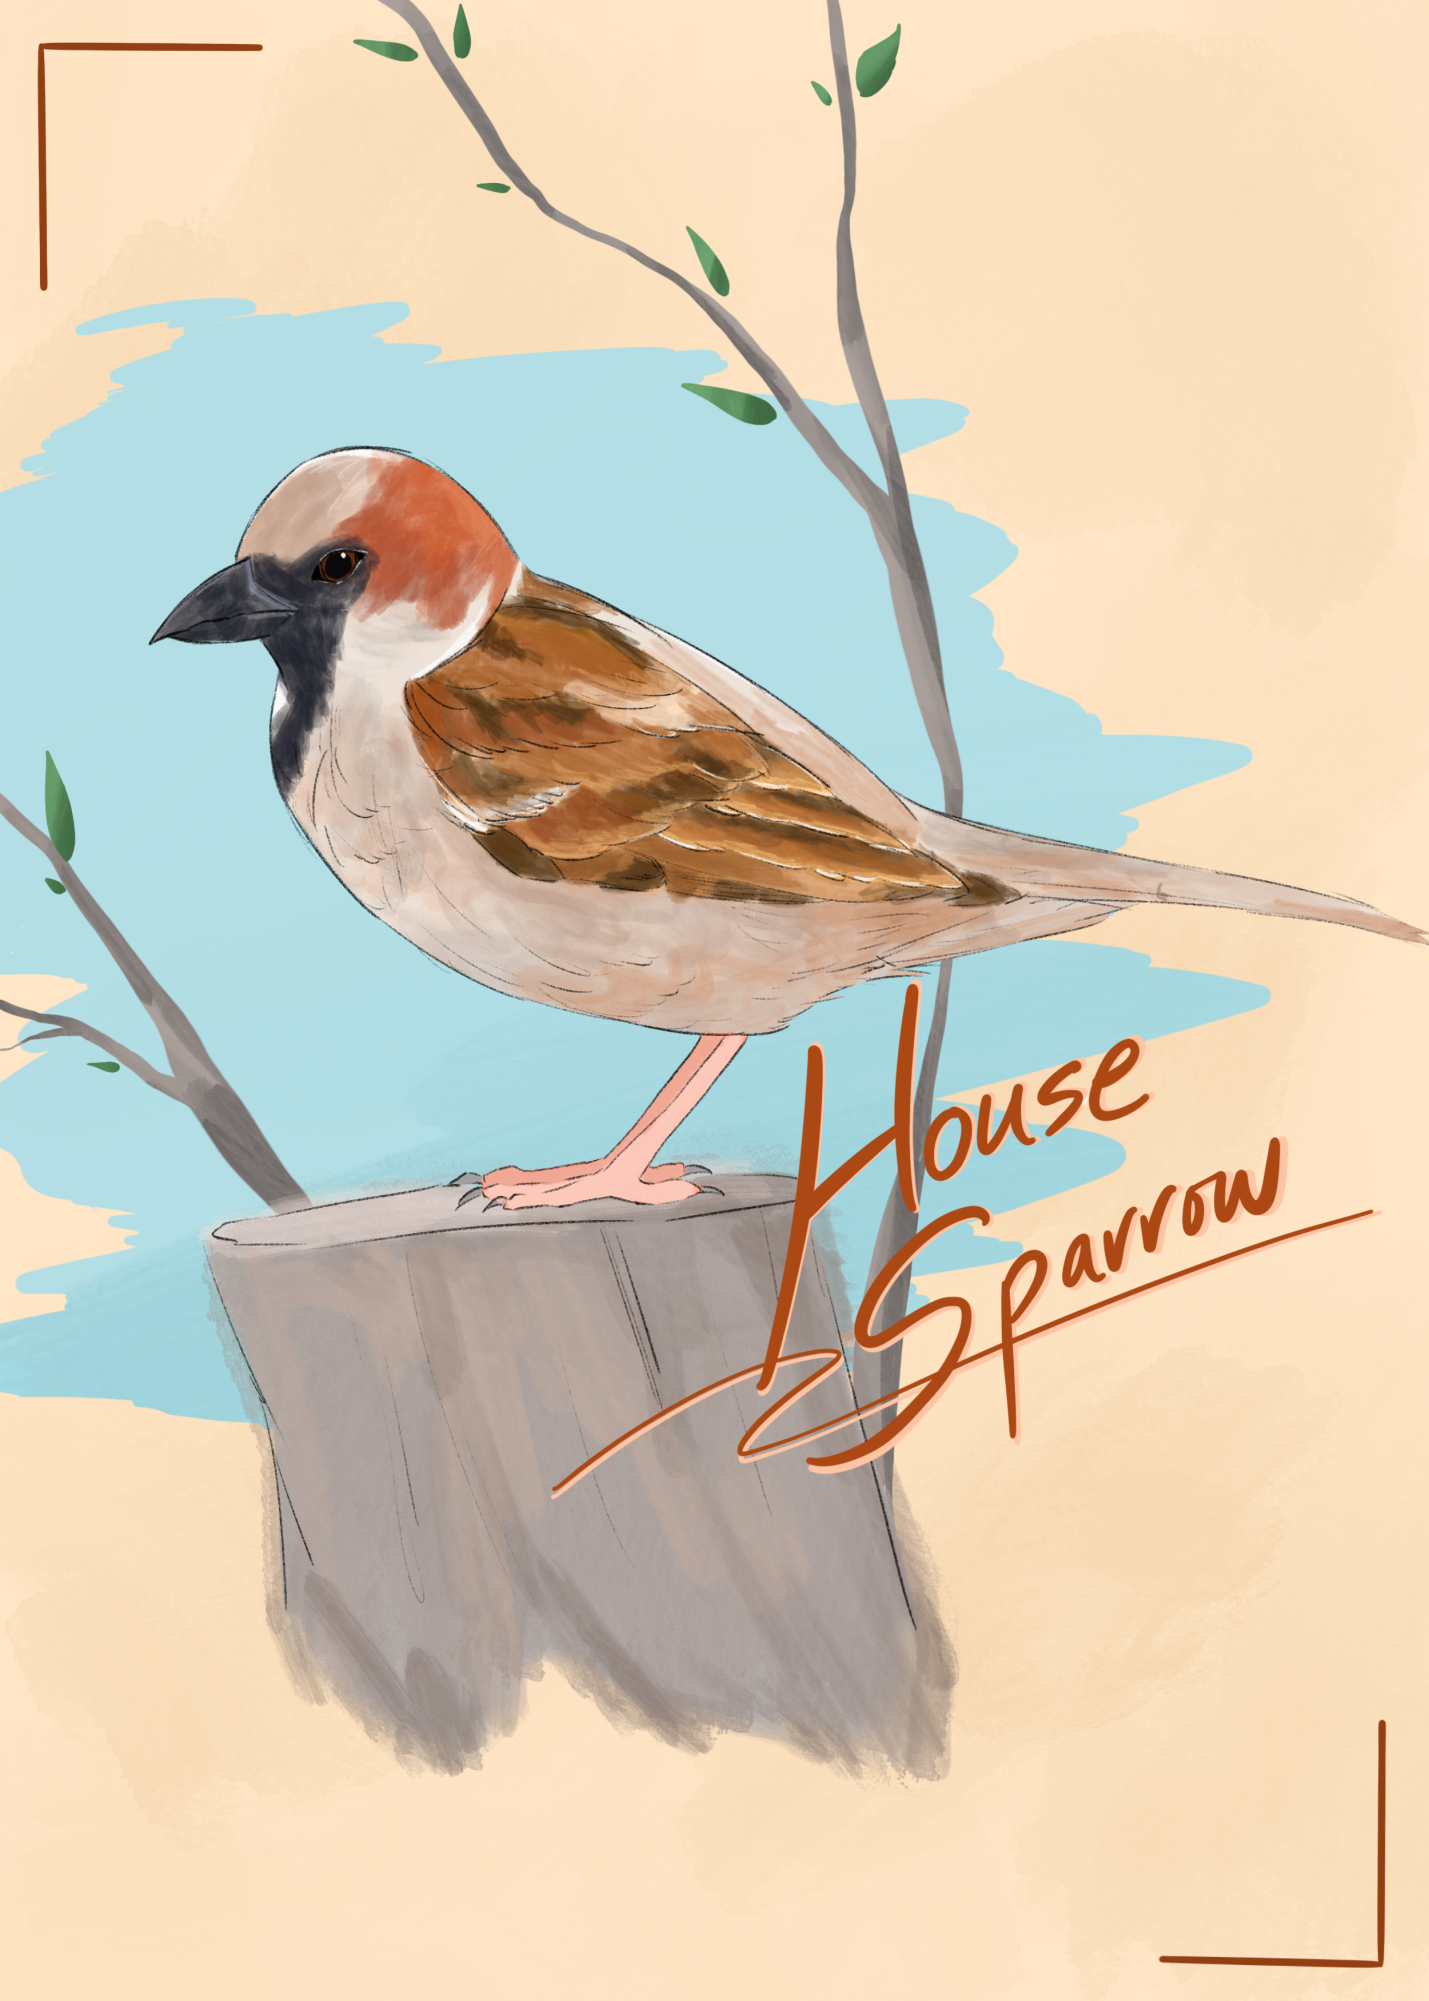 Closely associated with humans, it isn’t hard to find a house sparrow nearby in your neighborhood, especially with their success in survival leading to an abundance of them. From the attic and vents of homes to the streetlights dotting the road, house sparrows can be found nesting anywhere, waiting to pick at our leftover food.